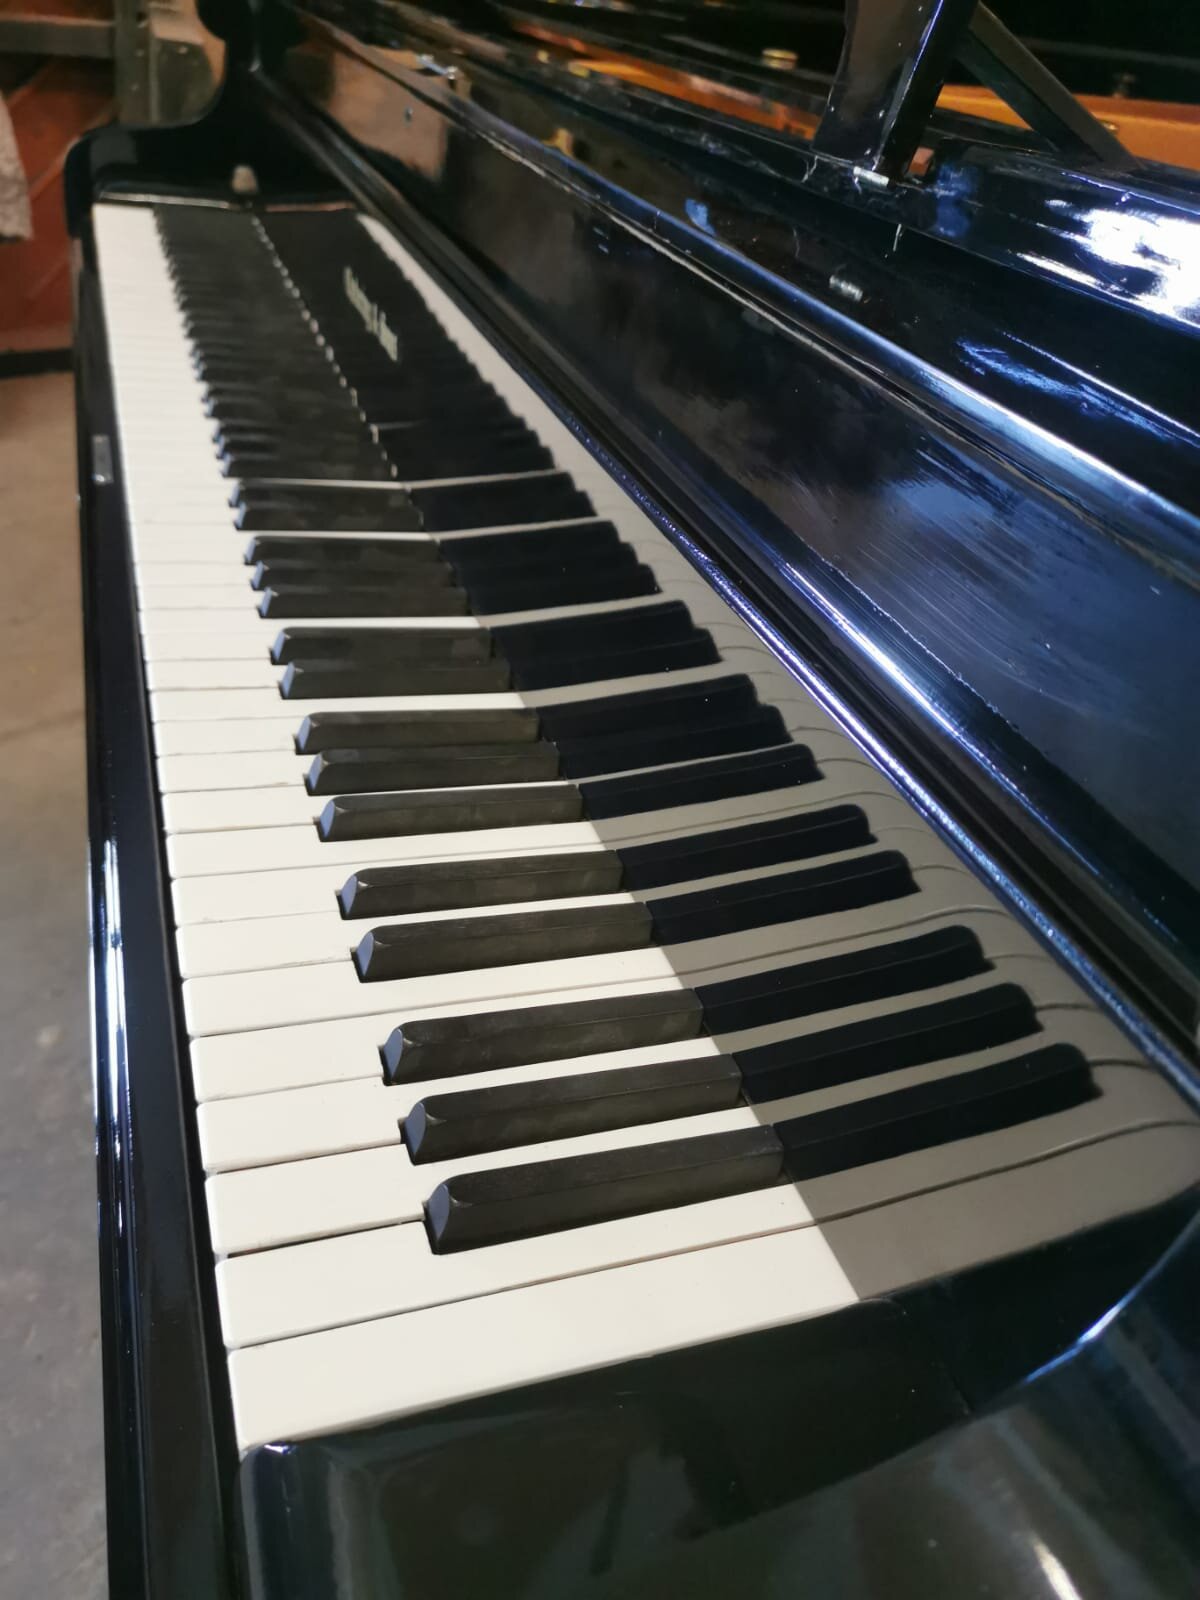 Chickering piano for sale5.jpeg